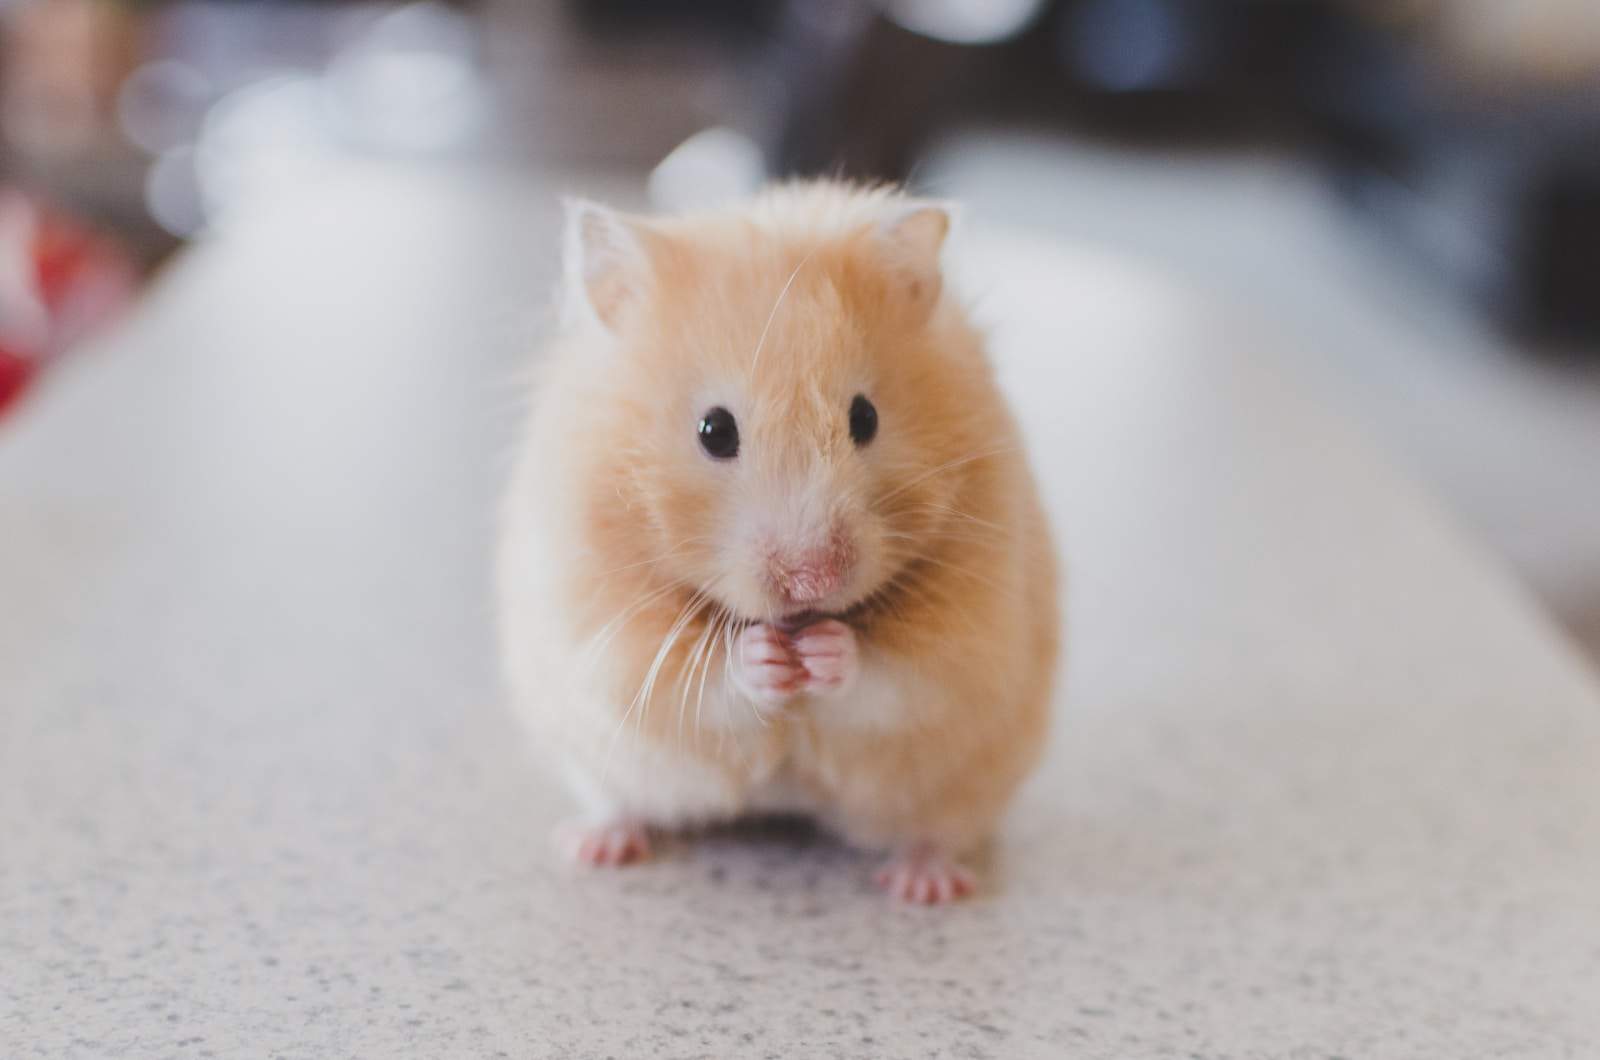 A hamster